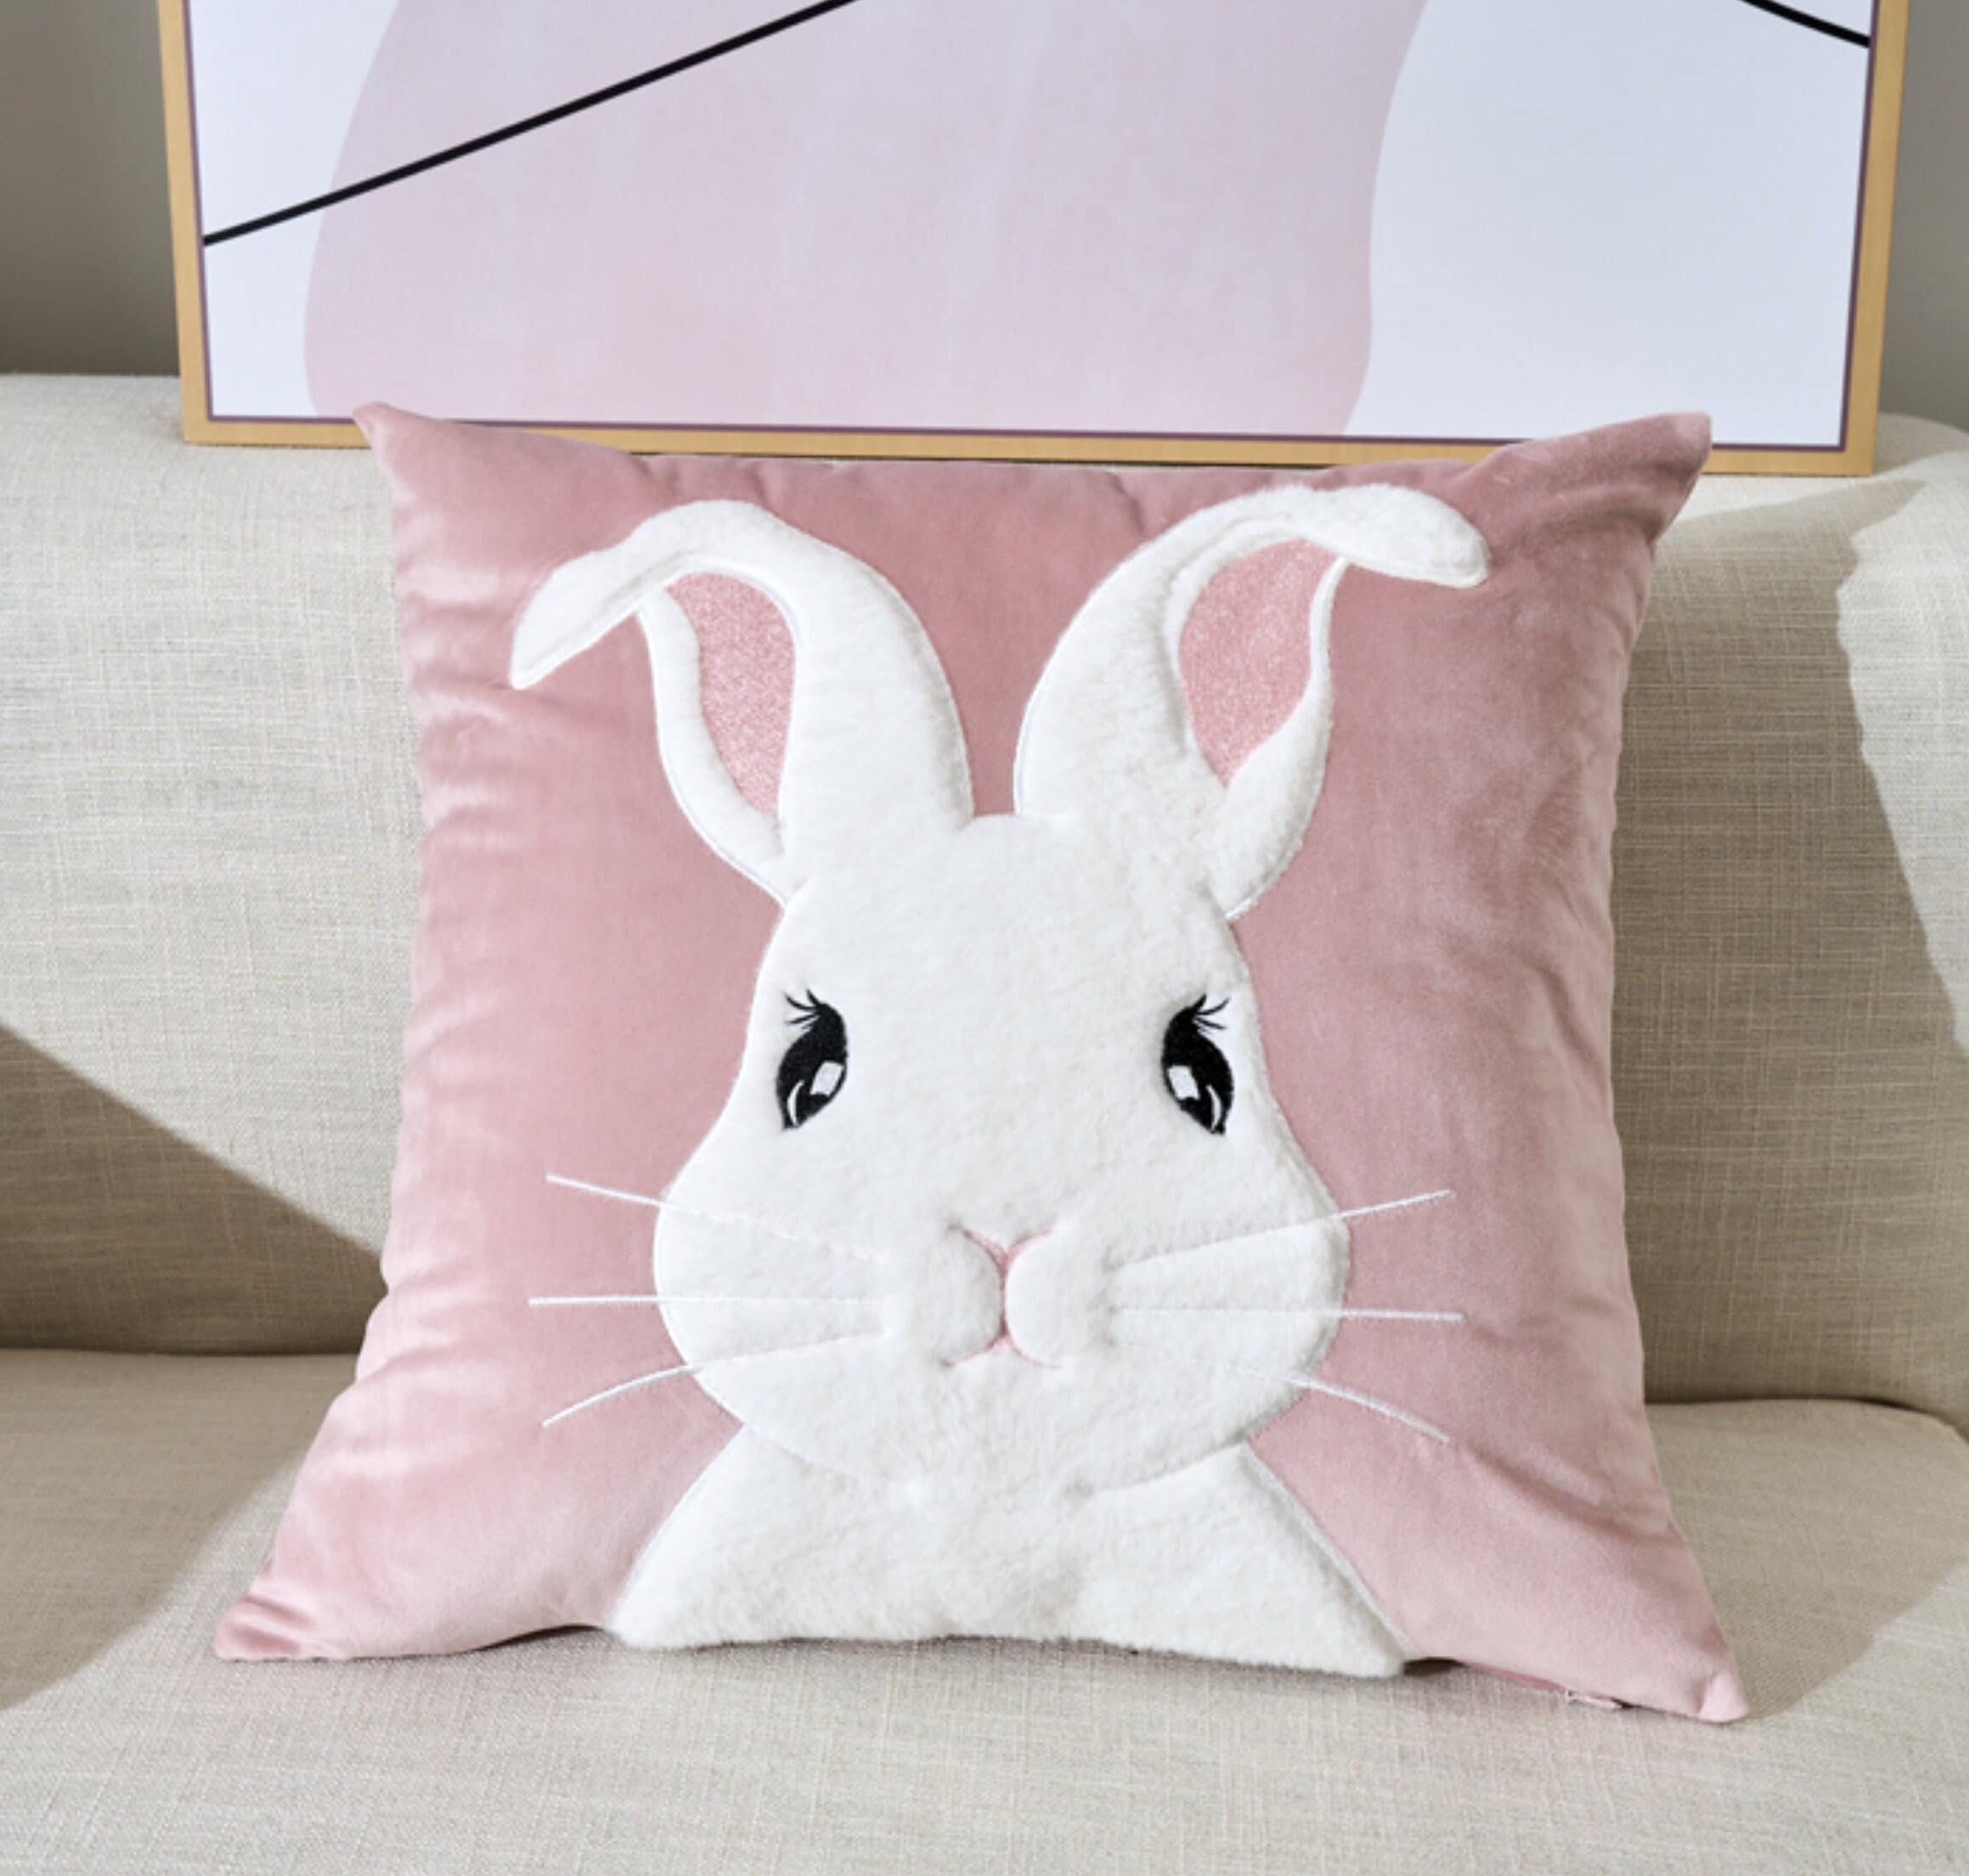 Sublimation Blank Cotton Linen Colorful Easter Bunny Ear Pillow Case Cover